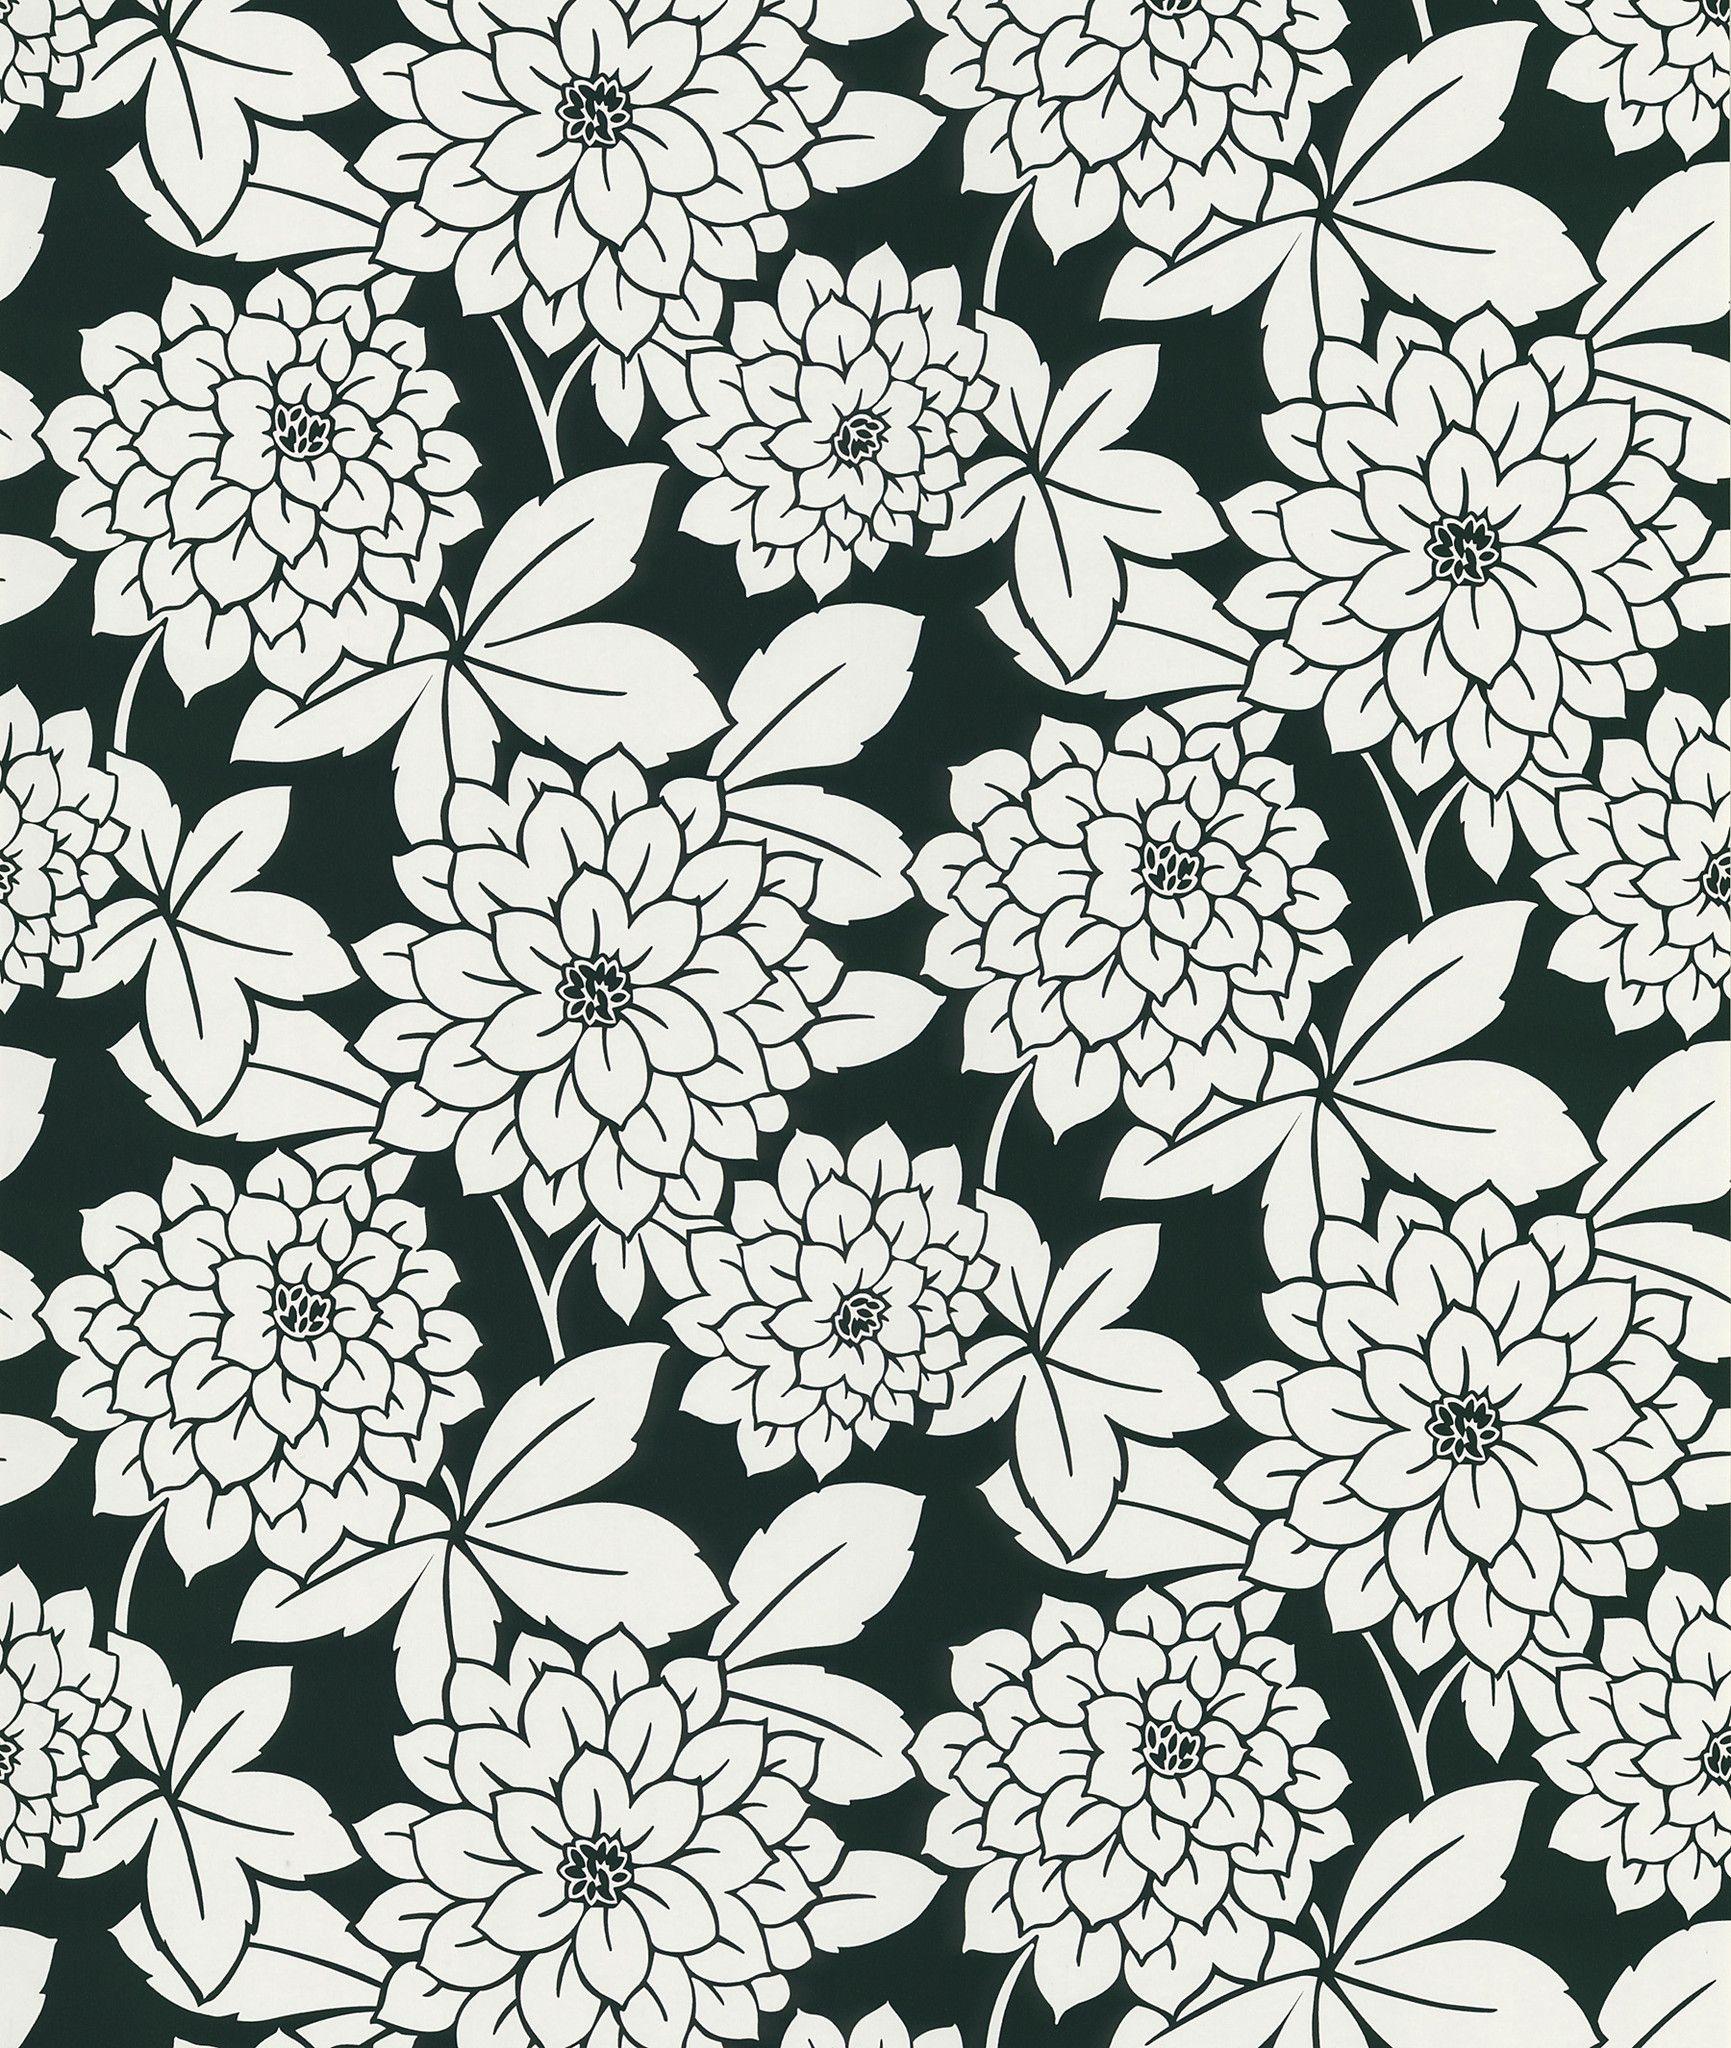 Souci Fun Floral Wallpaper in Black and White